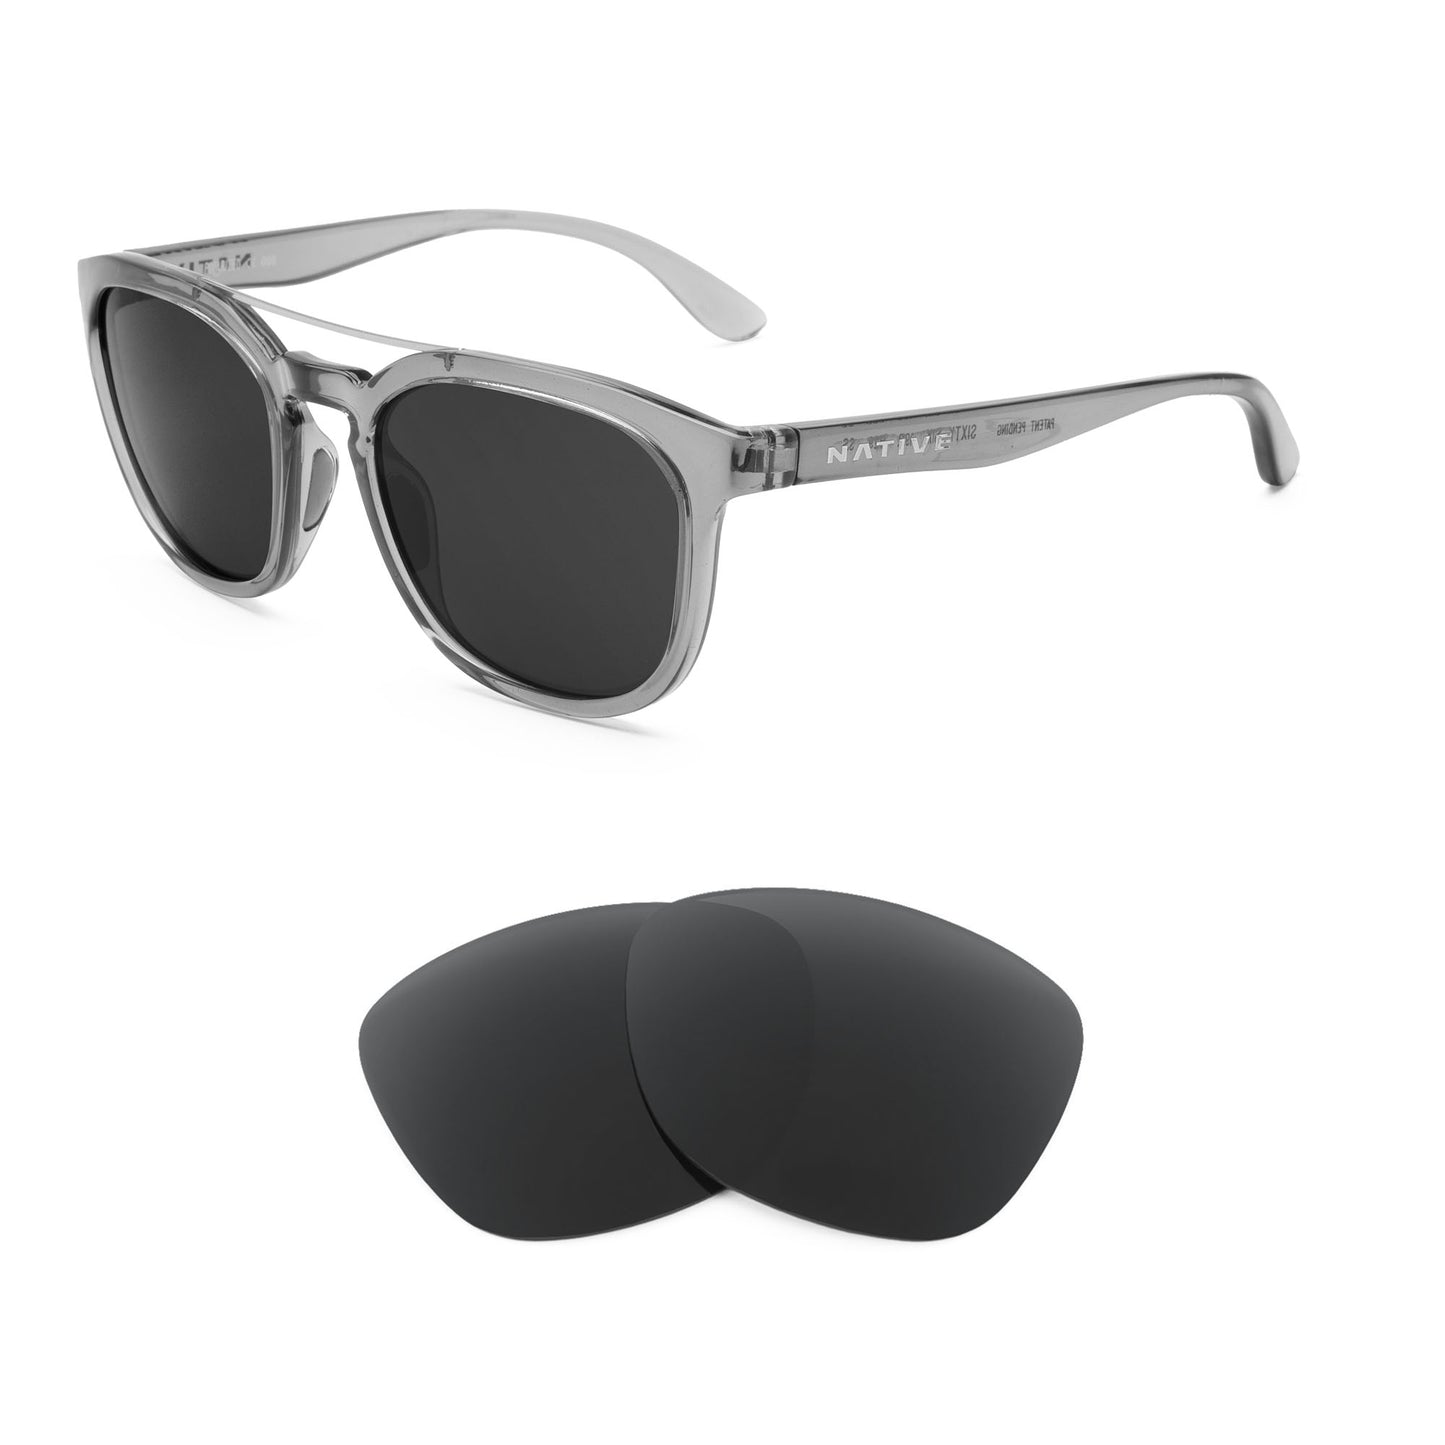 Native Sixty-Six sunglasses with replacement lenses